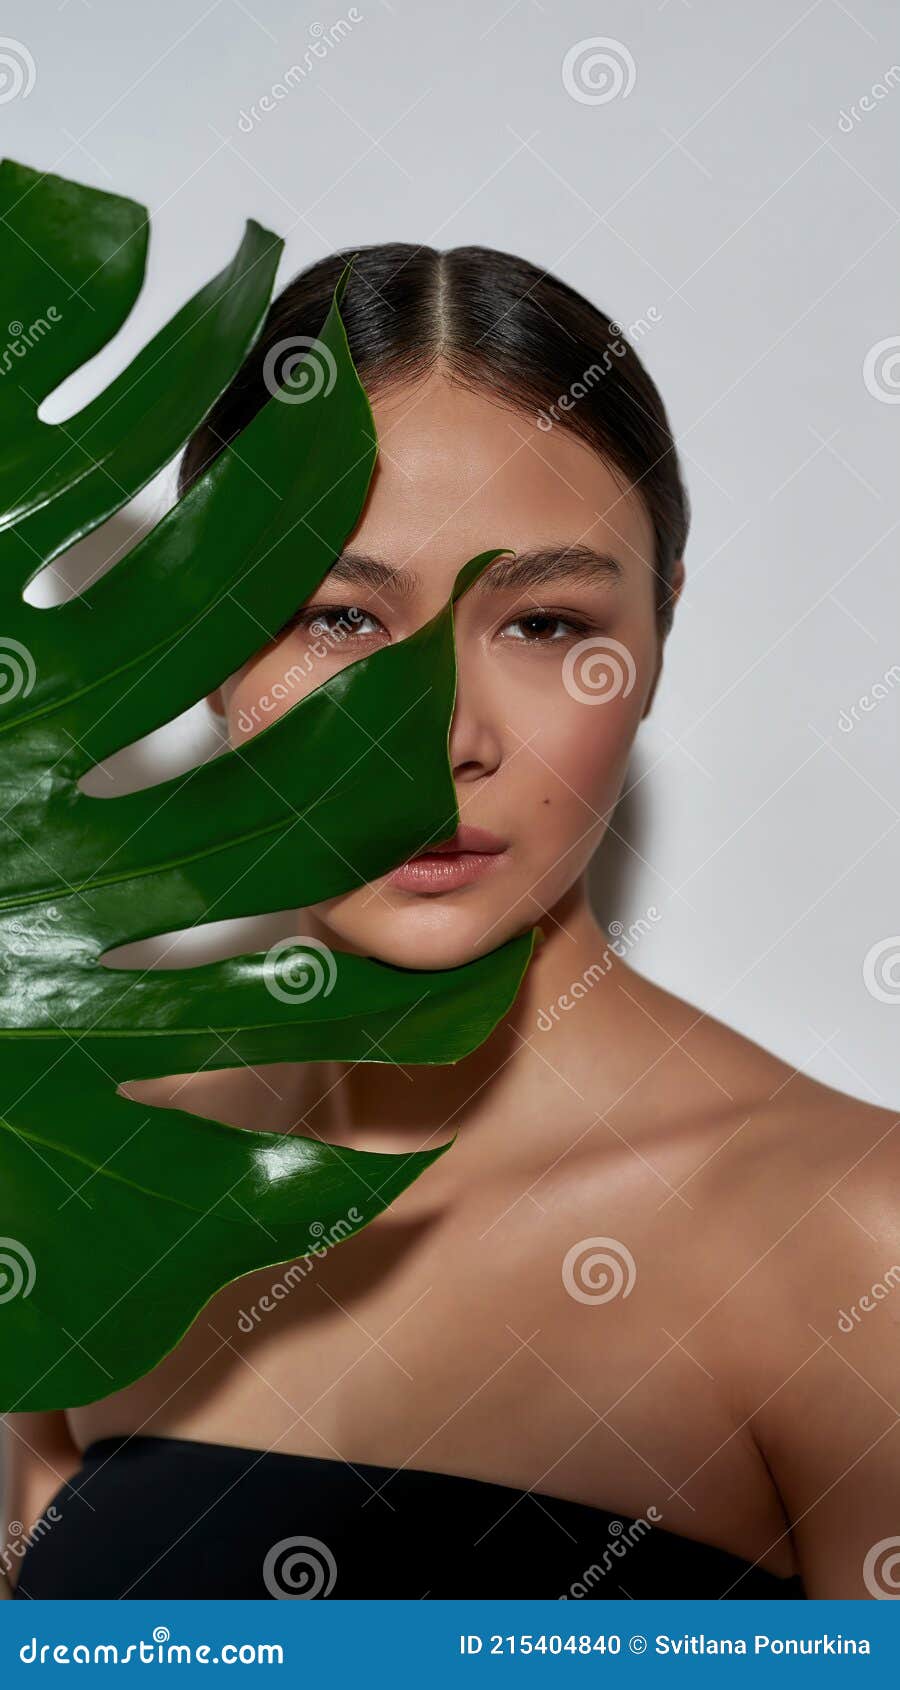 Top Asian Girls Nude - Portrait of a Young Magnificent Half-naked Asian Girl in a Black Top Face  Half-hidden with a Monstera Leaf Stock Photo - Image of mood, emotion:  215404840